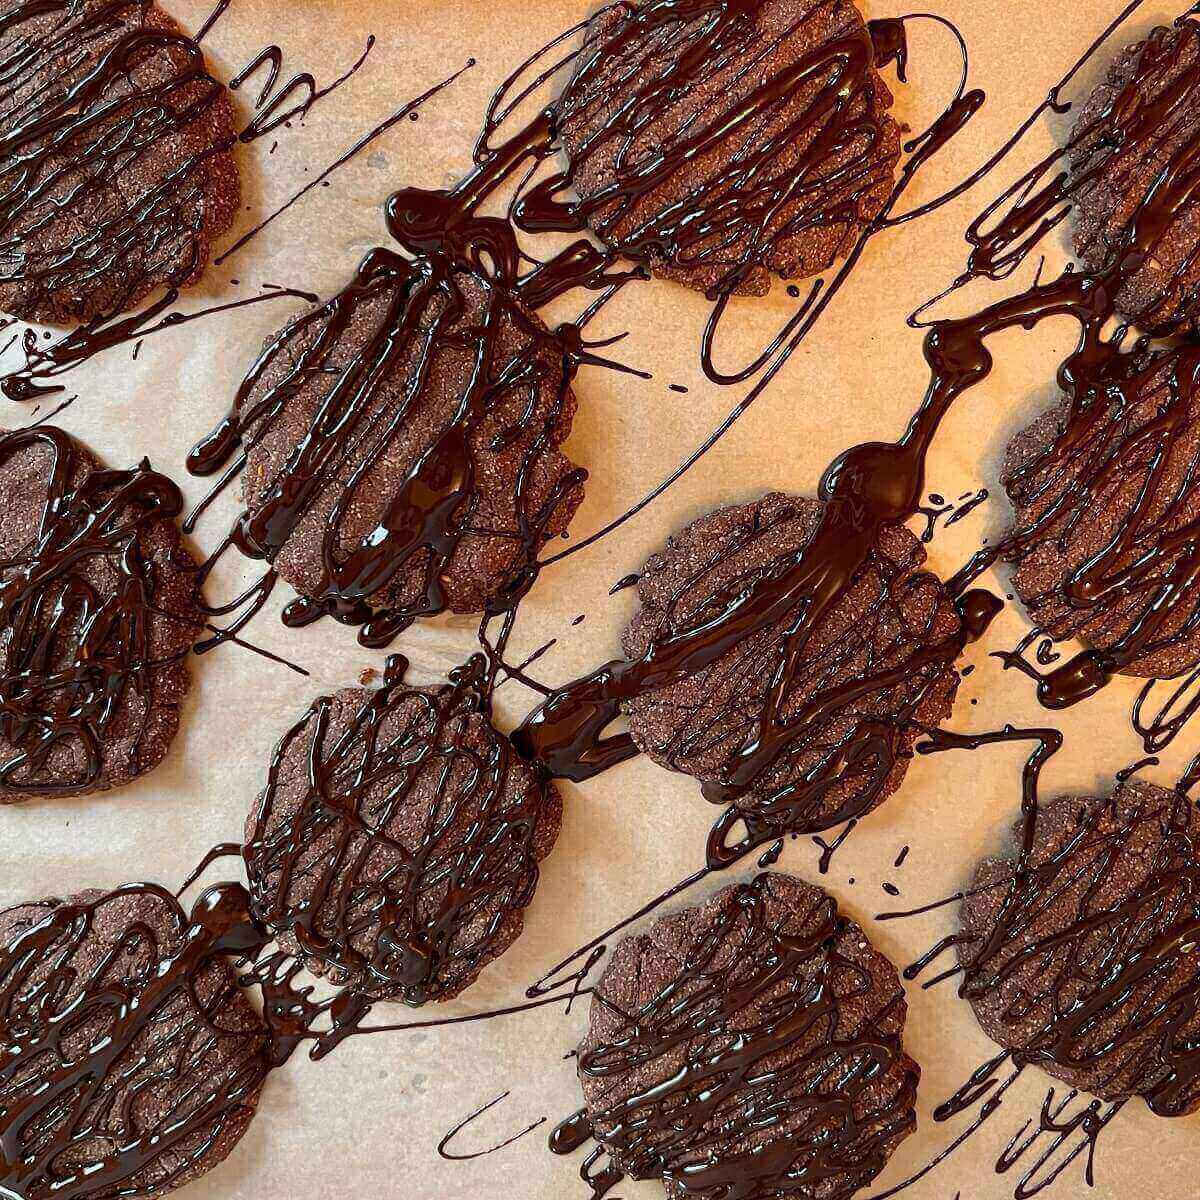 Cookies on parchment paper with melted chocolate drizzled on top.